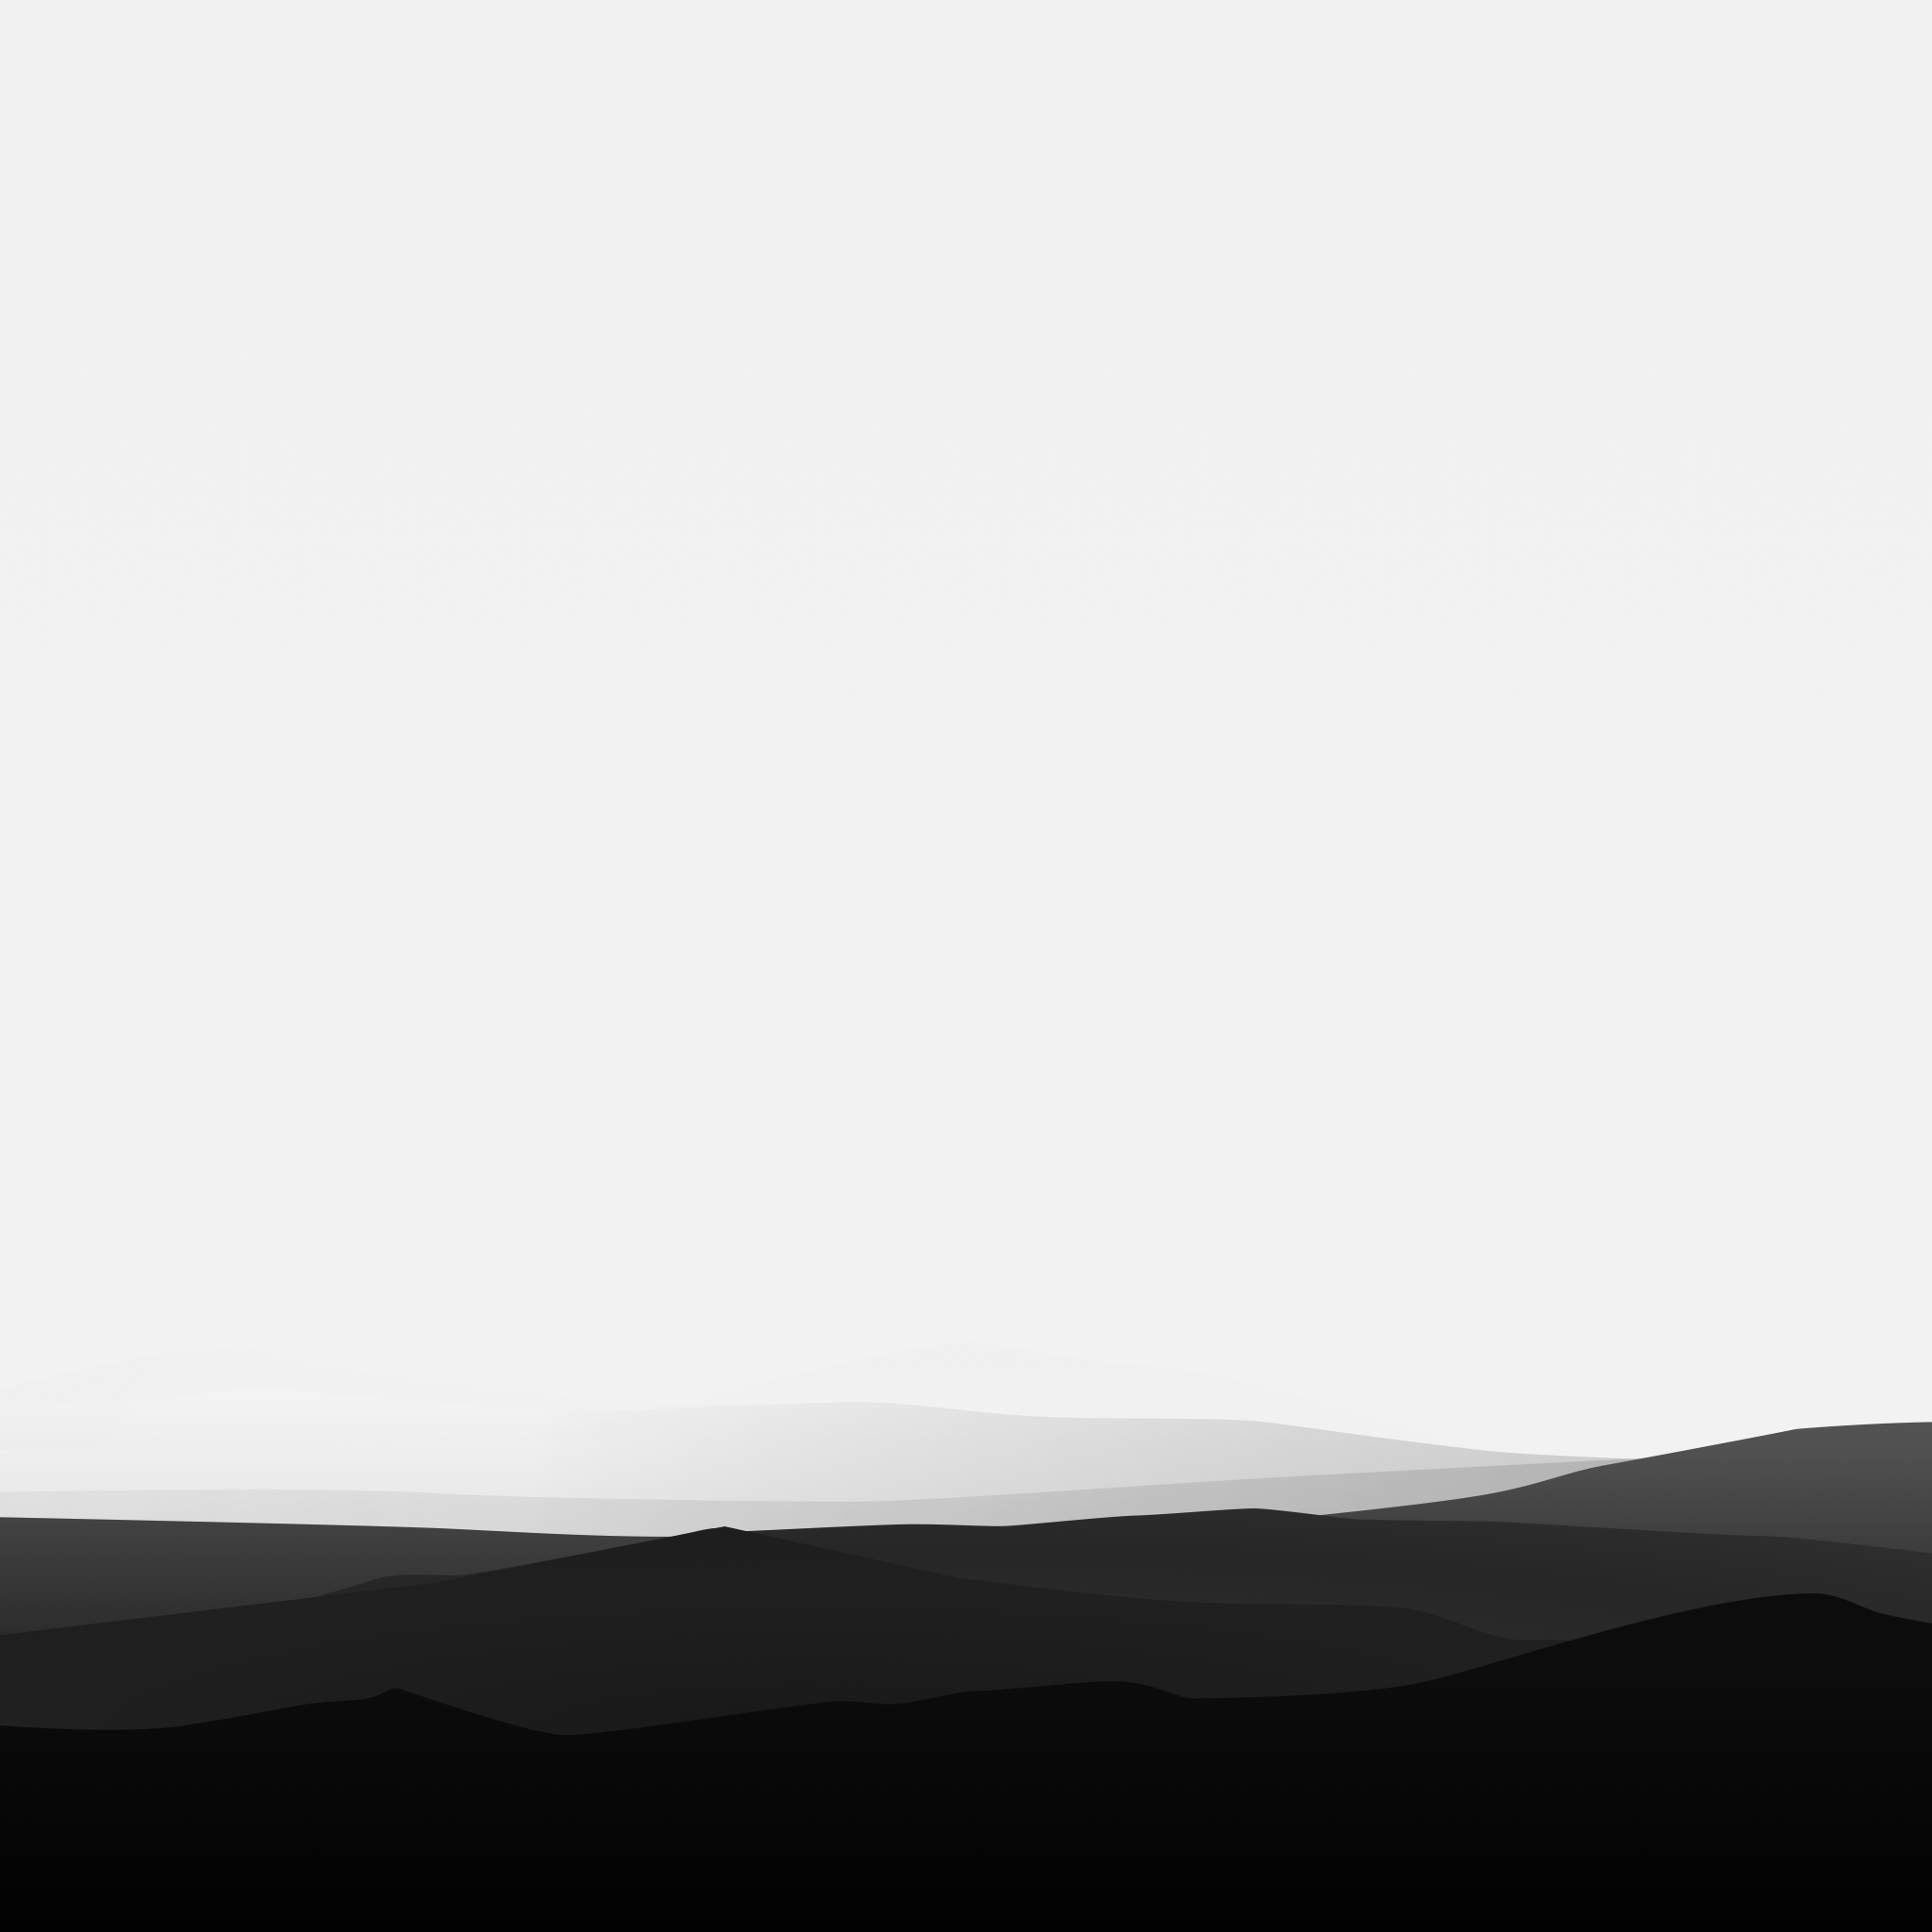 made some minimalist wallpapers inspired by the iPad Air and iPhone colors  some others 3840x2160  rwallpaper